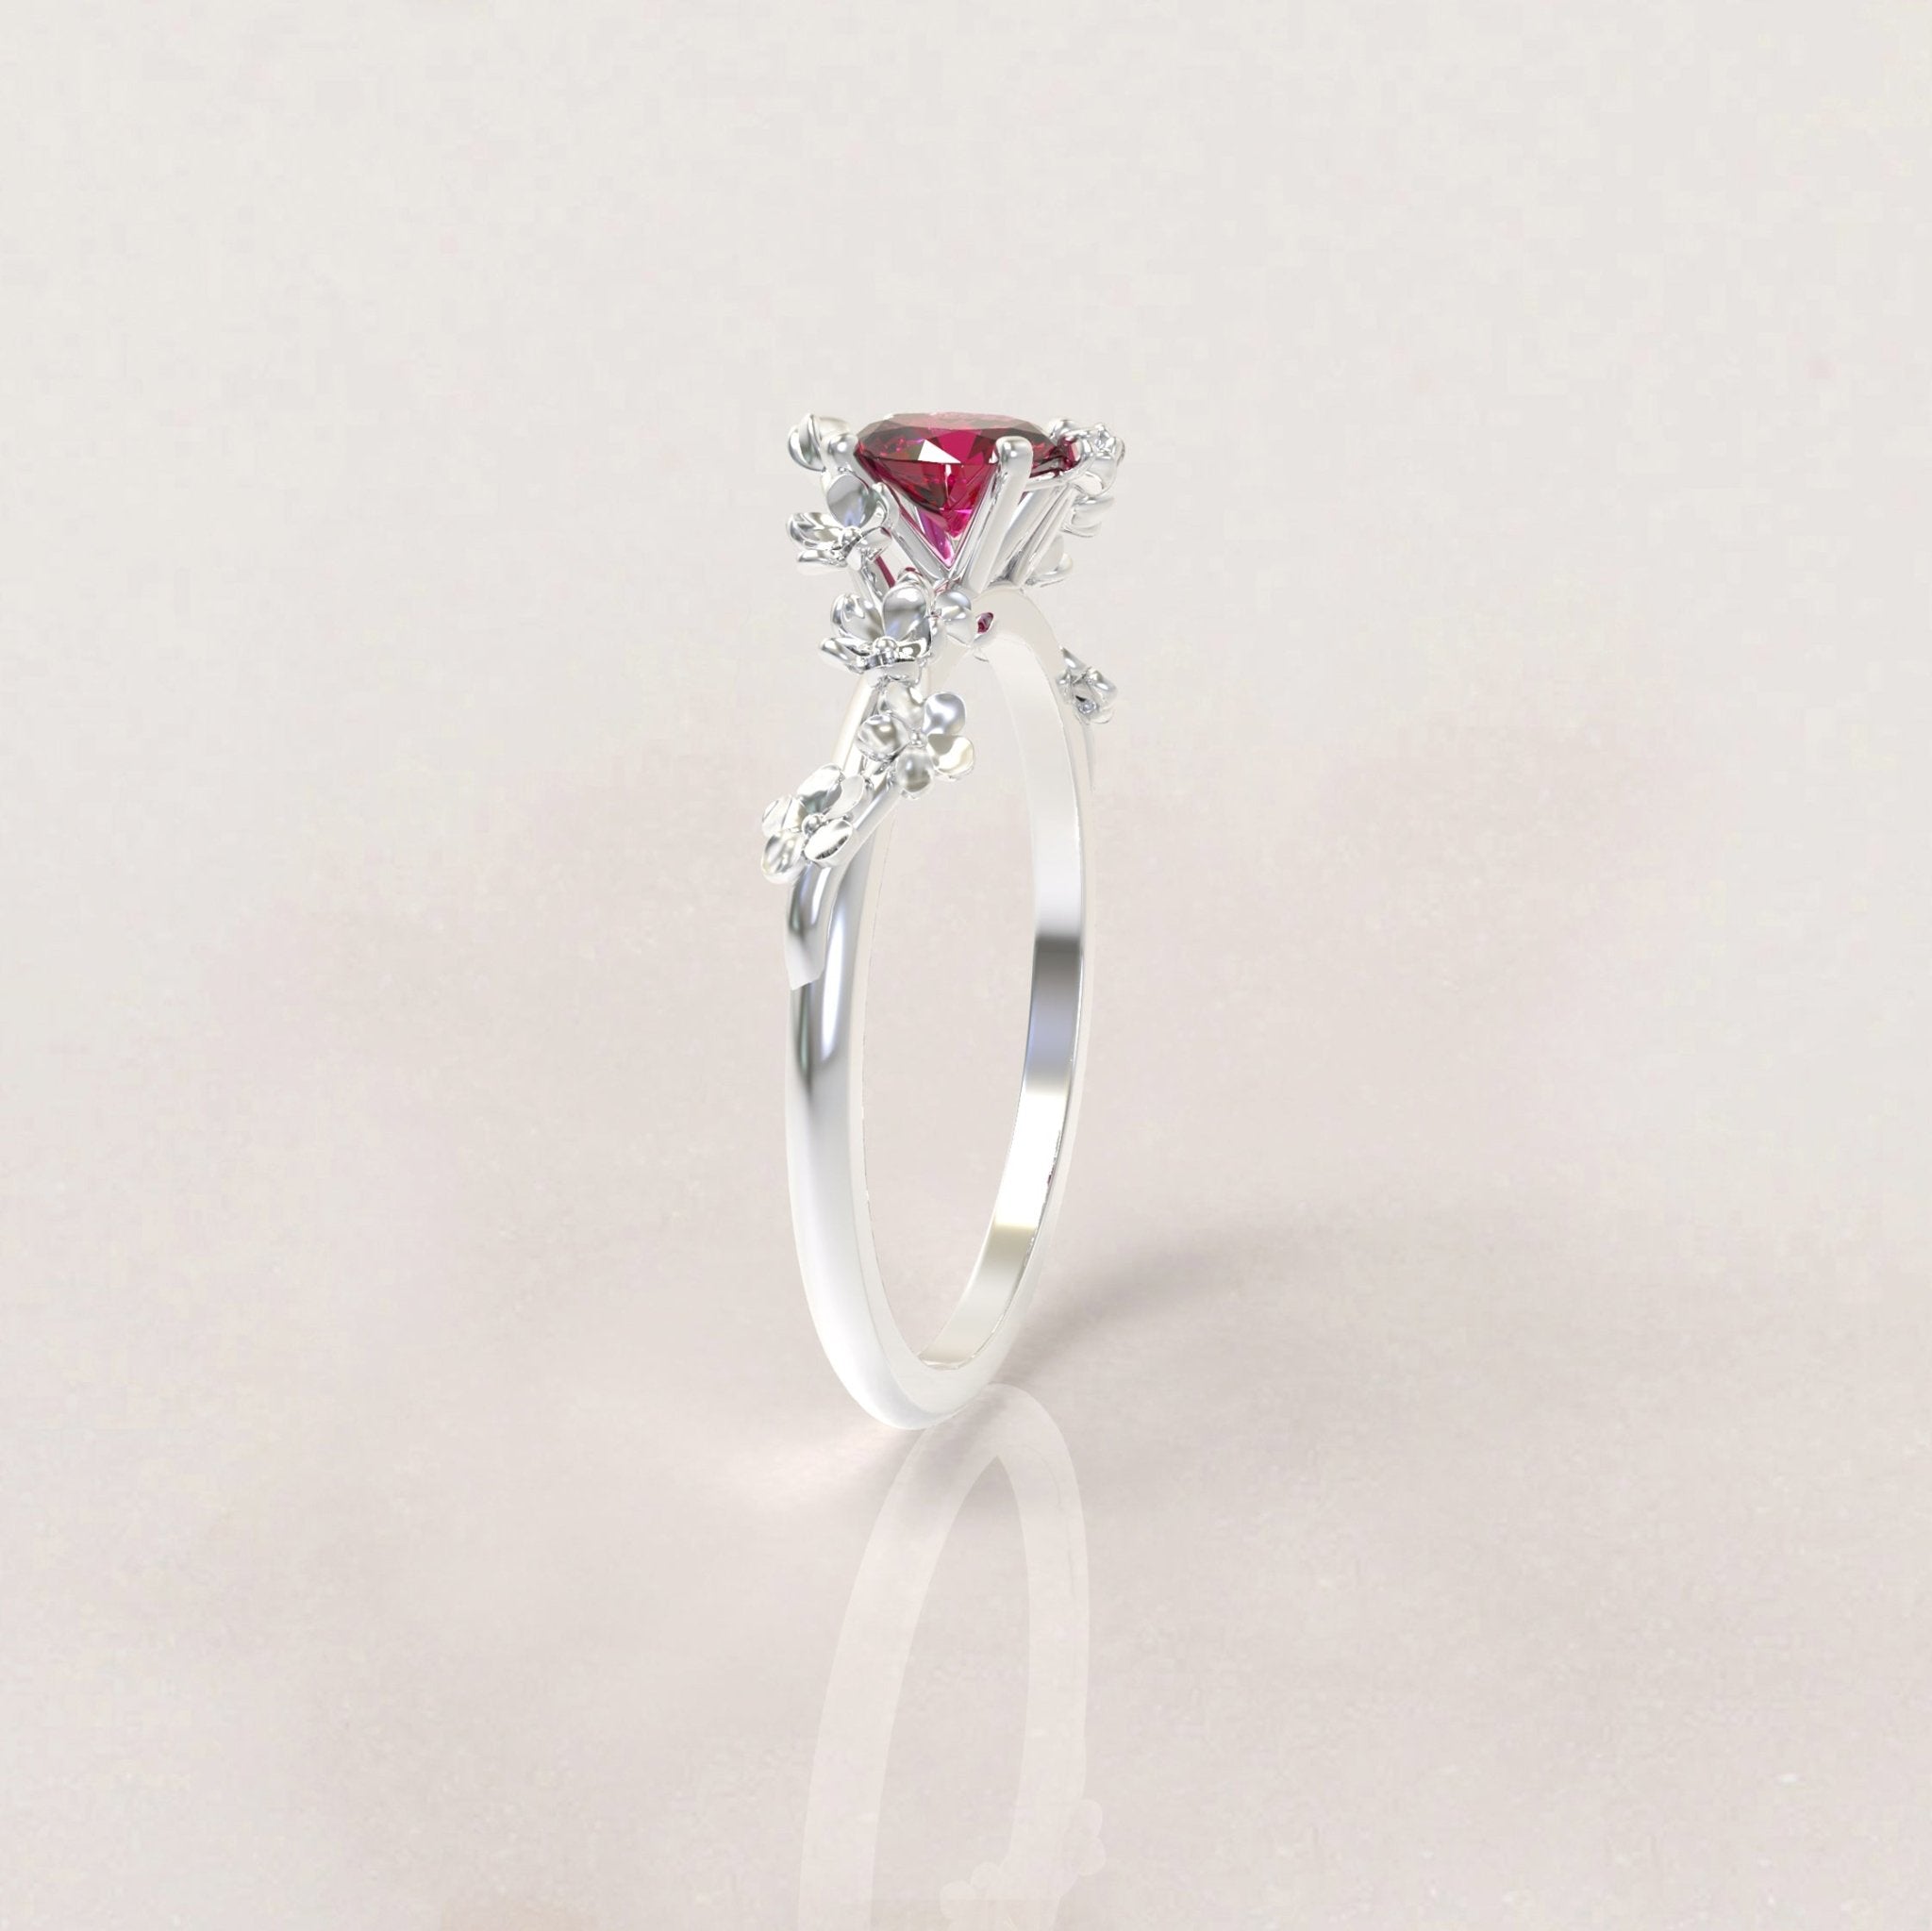 Unique Flowers Engagement Ring No.6 Version 2 in White Gold - Red Ruby - Roelavi